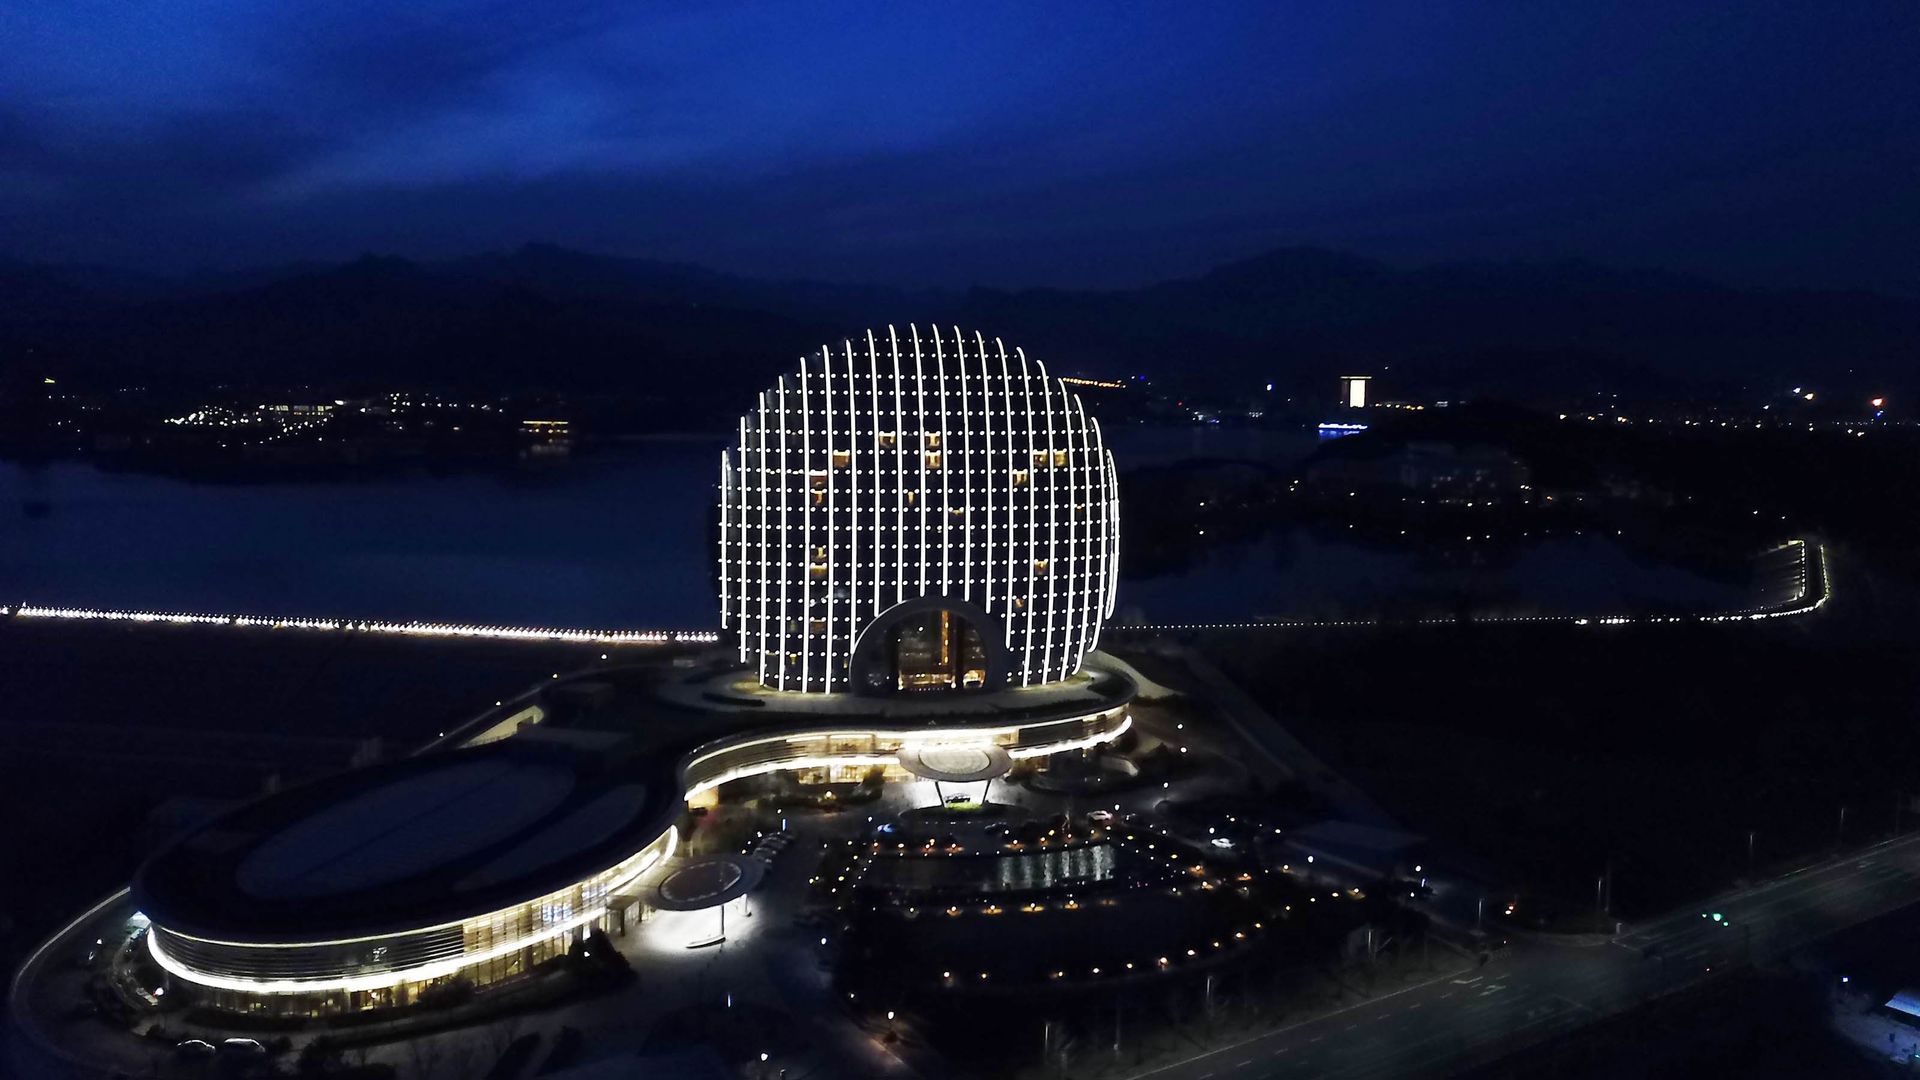 nighttime view of Belt and Road Forum venue in Beijing